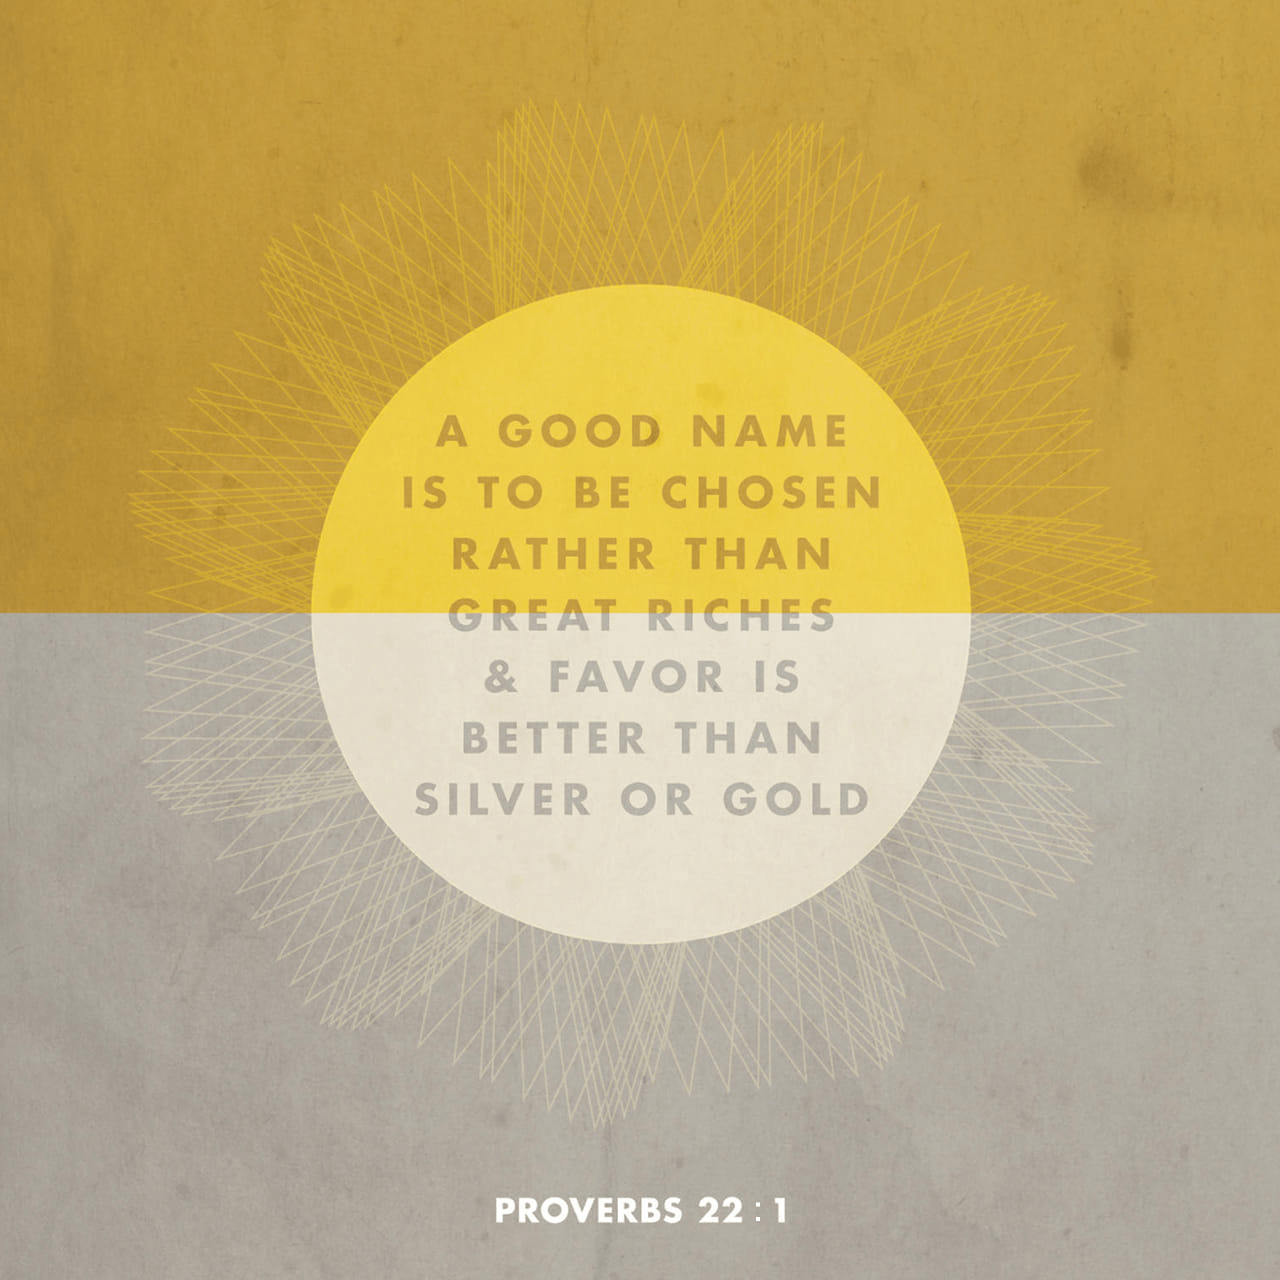 VOTD March 18 - “A good name is to be more desired than great wealth, Favor is better than silver and gold.” ‭‭Proverbs‬ ‭22:1‬ ‭NASB‬‬